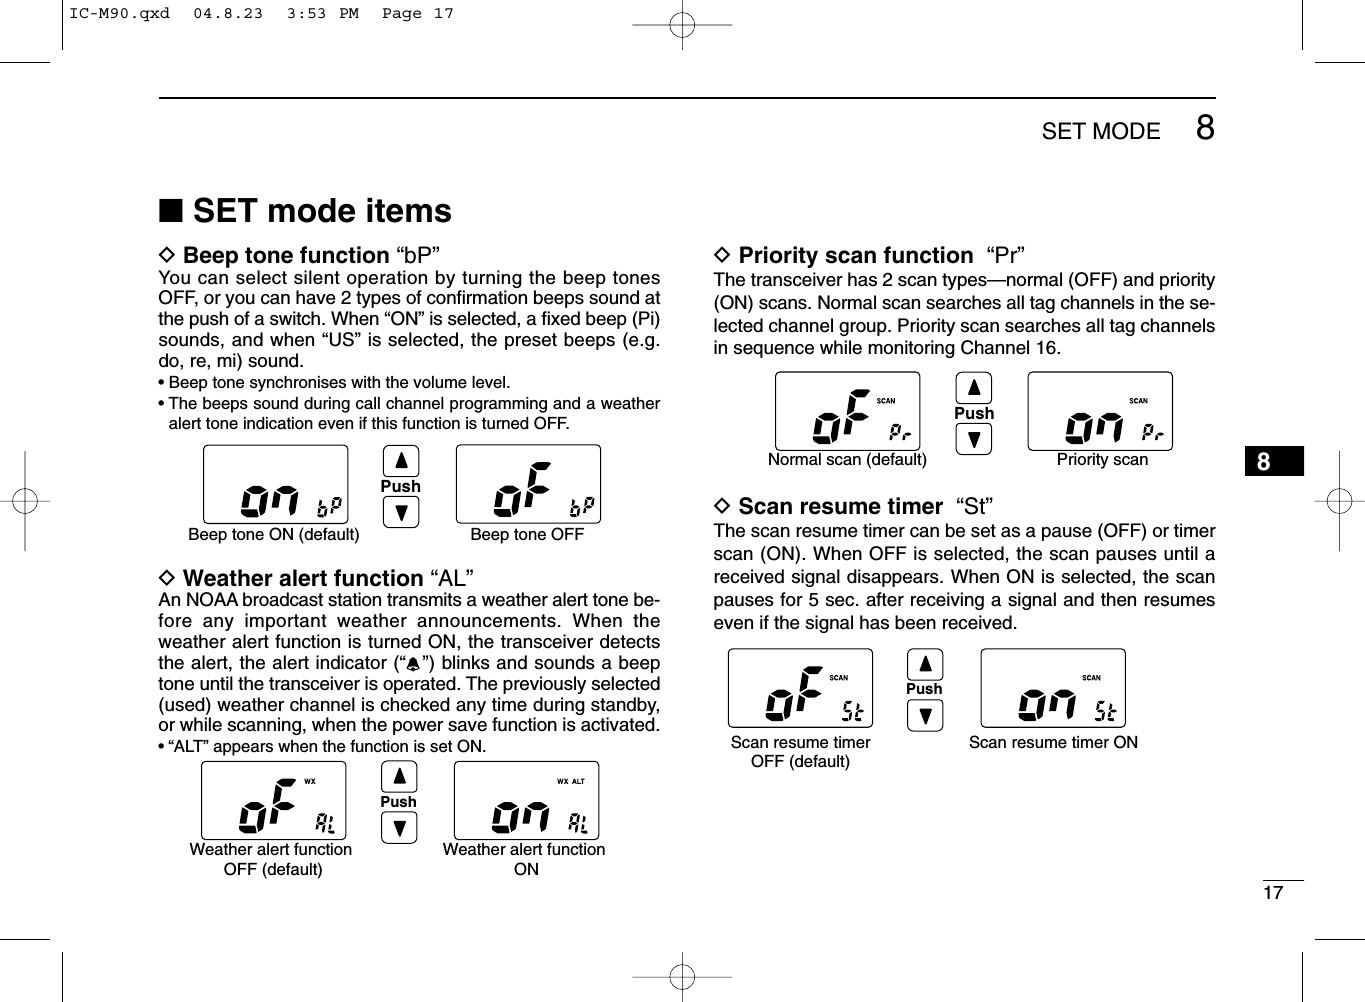 178SET MODE8■SET mode itemsDBeep tone function “bP”You can select silent operation by turning the beep tonesOFF, or you can have 2 types of conﬁrmation beeps sound atthe push of a switch. When “ON” is selected, a ﬁxed beep (Pi)sounds, and when “US” is selected, the preset beeps (e.g.do, re, mi) sound.• Beep tone synchronises with the volume level.• The beeps sound during call channel programming and a weatheralert tone indication even if this function is turned OFF.DWeather alert function “AL”An NOAA broadcast station transmits a weather alert tone be-fore any important weather announcements. When theweather alert function is turned ON, the transceiver detectsthe alert, the alert indicator (“”) blinks and sounds a beeptone until the transceiver is operated. The previously selected(used) weather channel is checked any time during standby,or while scanning, when the power save function is activated.•“ALT” appears when the function is set ON.DPriority scan function “Pr”The transceiver has 2 scan types—normal (OFF) and priority(ON) scans. Normal scan searches all tag channels in the se-lected channel group. Priority scan searches all tag channelsin sequence while monitoring Channel 16.DScan resume timer “St”The scan resume timer can be set as a pause (OFF) or timerscan (ON). When OFF is selected, the scan pauses until areceived signal disappears. When ON is selected, the scanpauses for 5 sec. after receiving a signal and then resumeseven if the signal has been received.Scan resume timerOFF (default)Scan resume timer ONPushPushBeep tone ON (default) Beep tone OFFPushNormal scan (default) Priority scanPushWeather alert function OFF (default)Weather alert function ONIC-M90.qxd  04.8.23  3:53 PM  Page 17